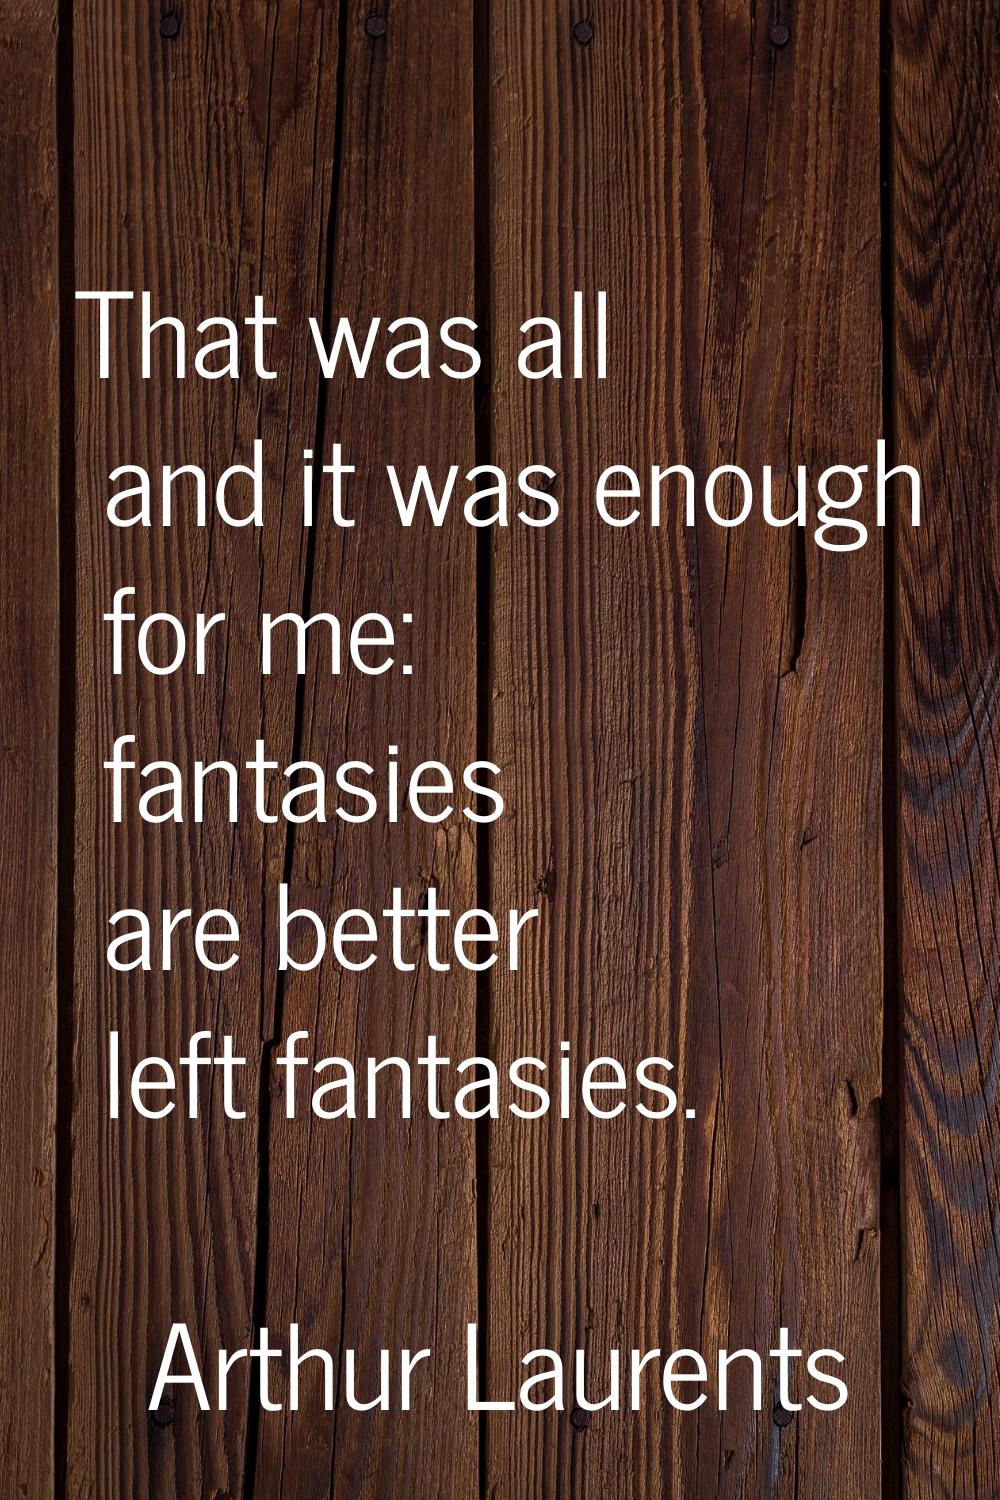 That was all and it was enough for me: fantasies are better left fantasies.